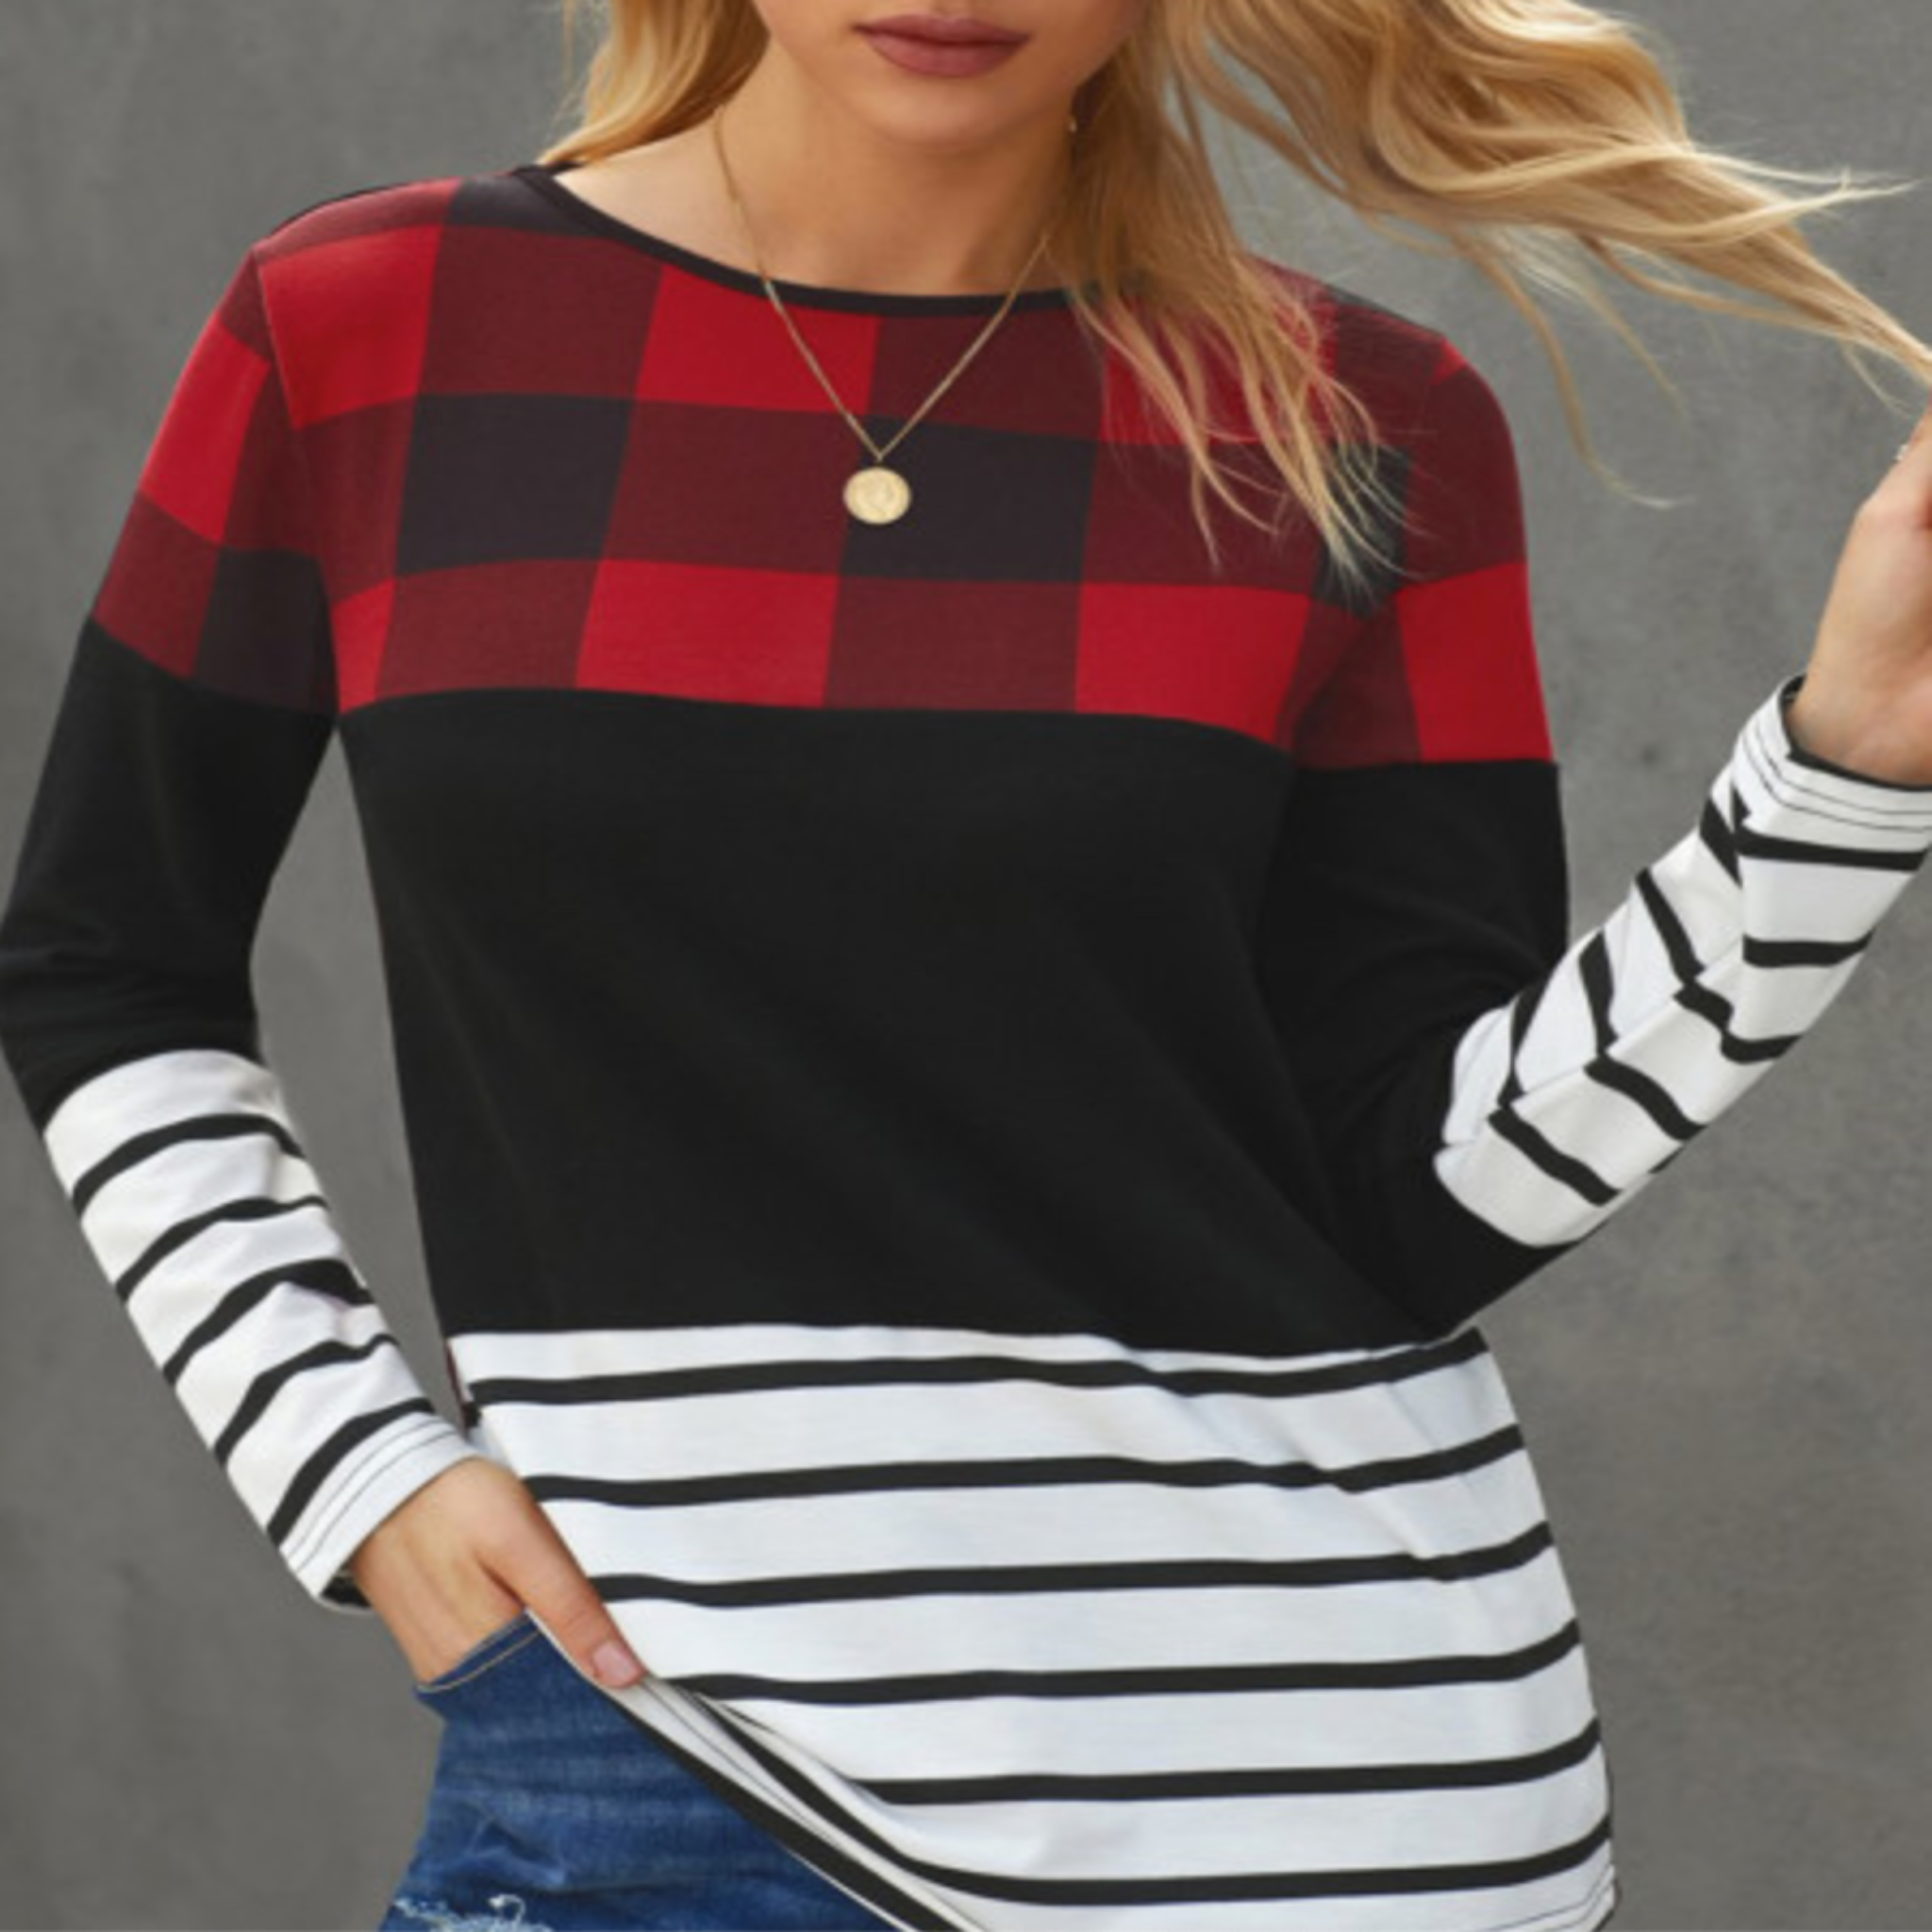 Red Plaid Striped Top